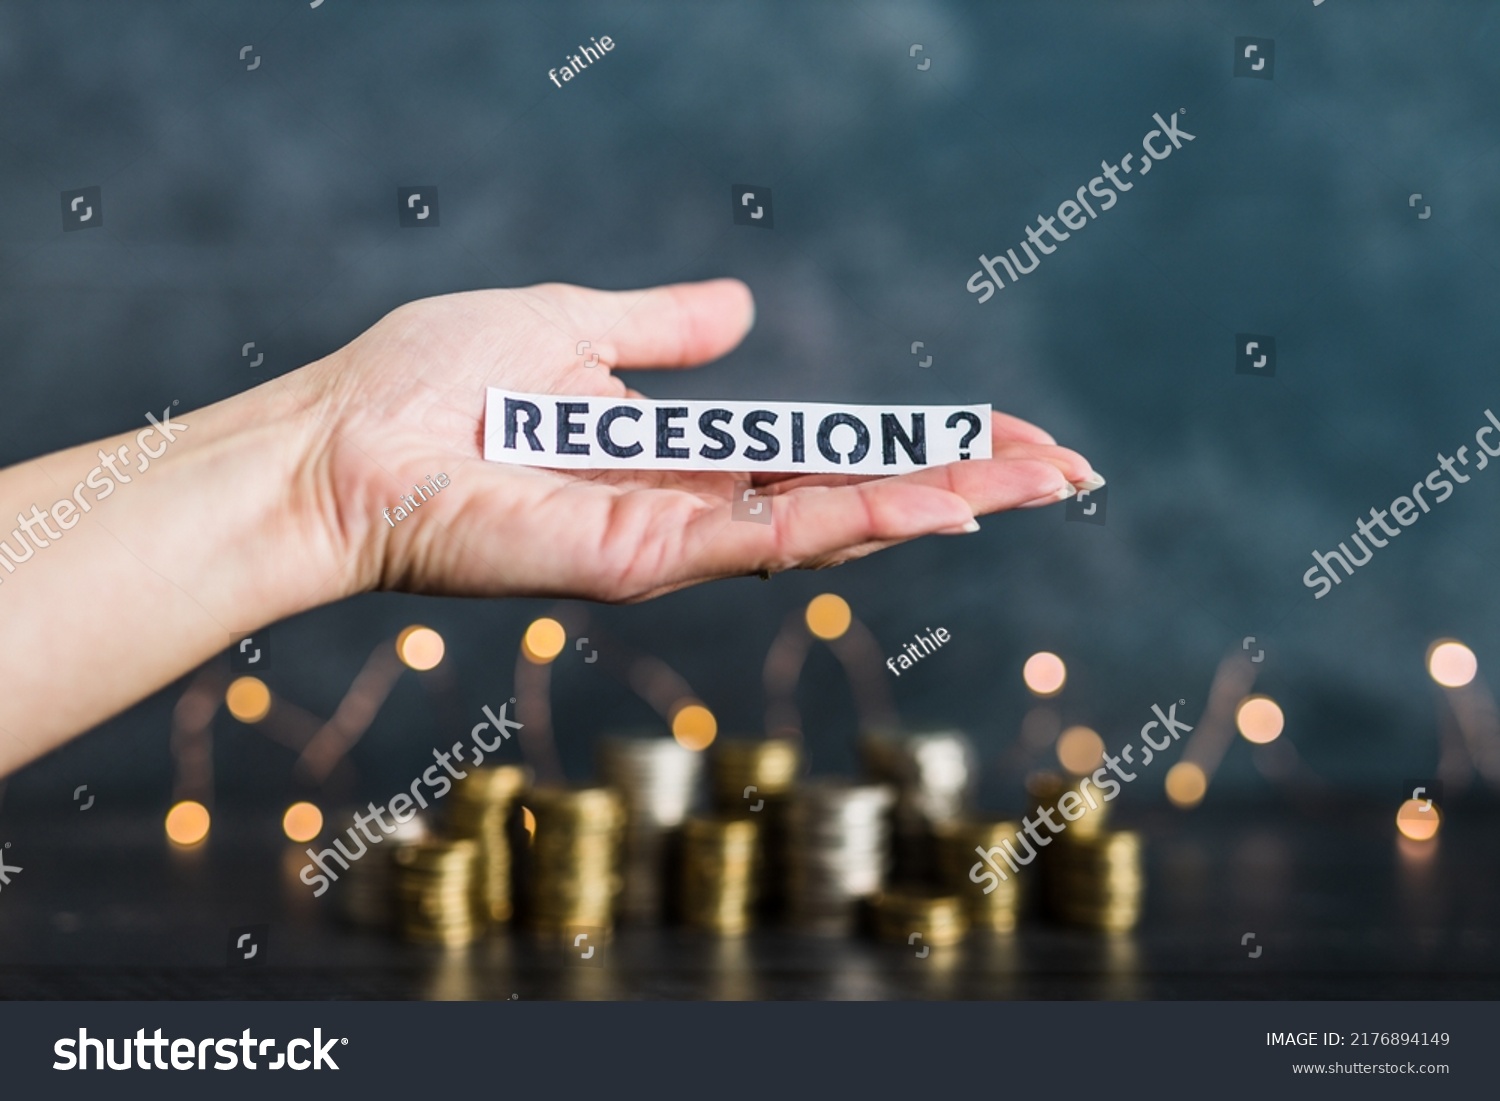 recession and inflation after the Covid-19 pandemic conceptual image, hand holding Recession text in front of stacks of coins with fairy lights in the background #2176894149